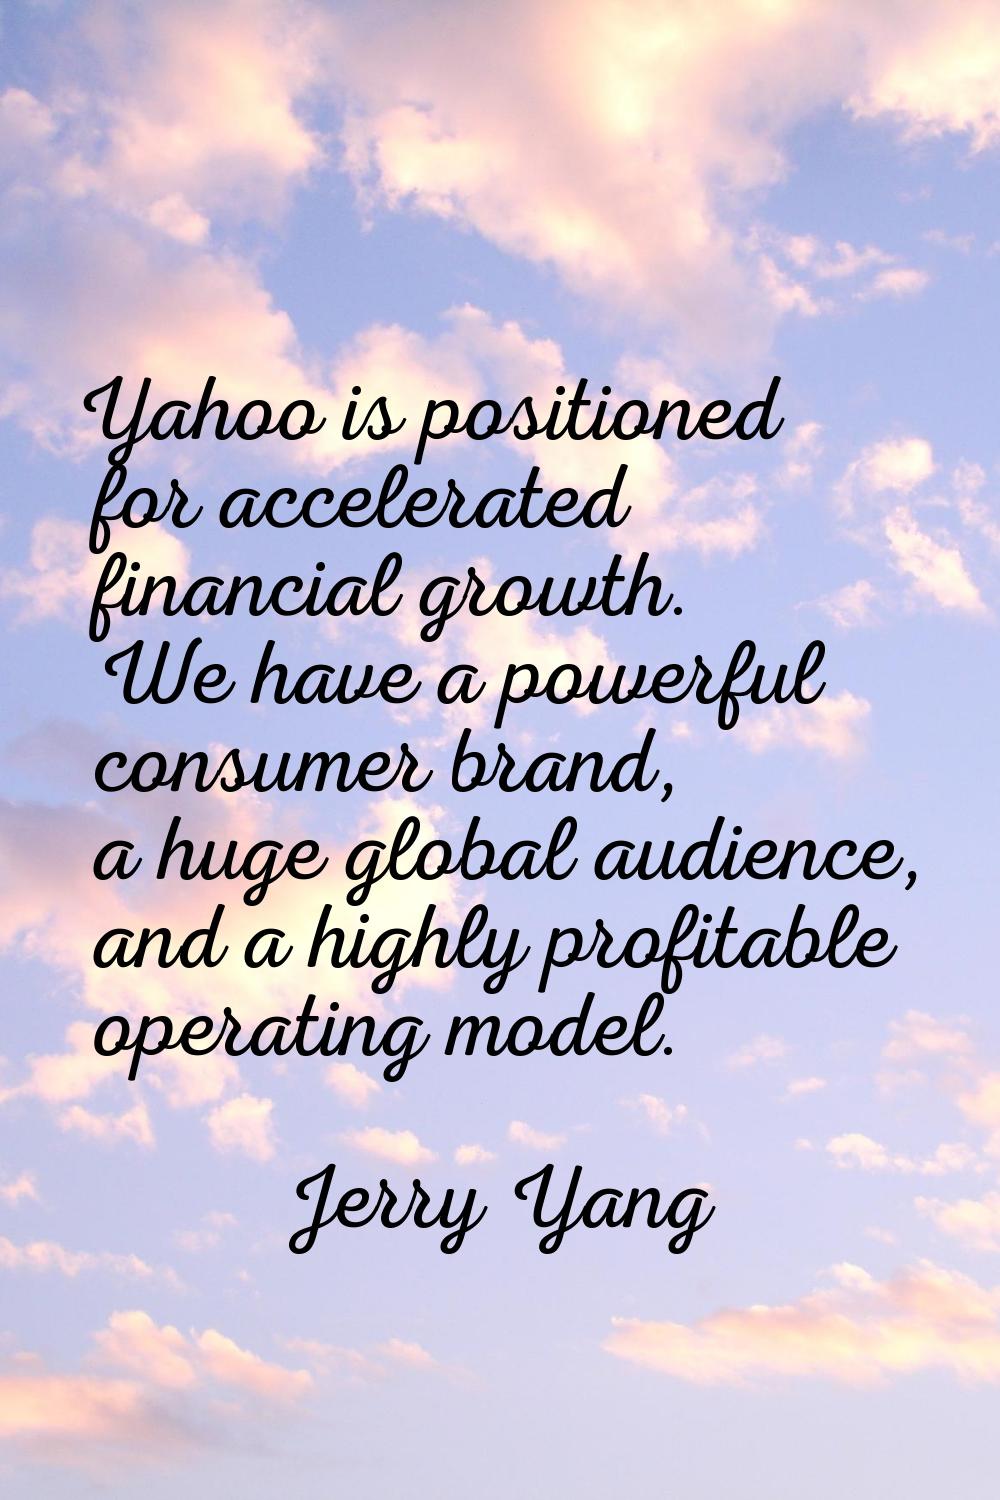 Yahoo is positioned for accelerated financial growth. We have a powerful consumer brand, a huge glo